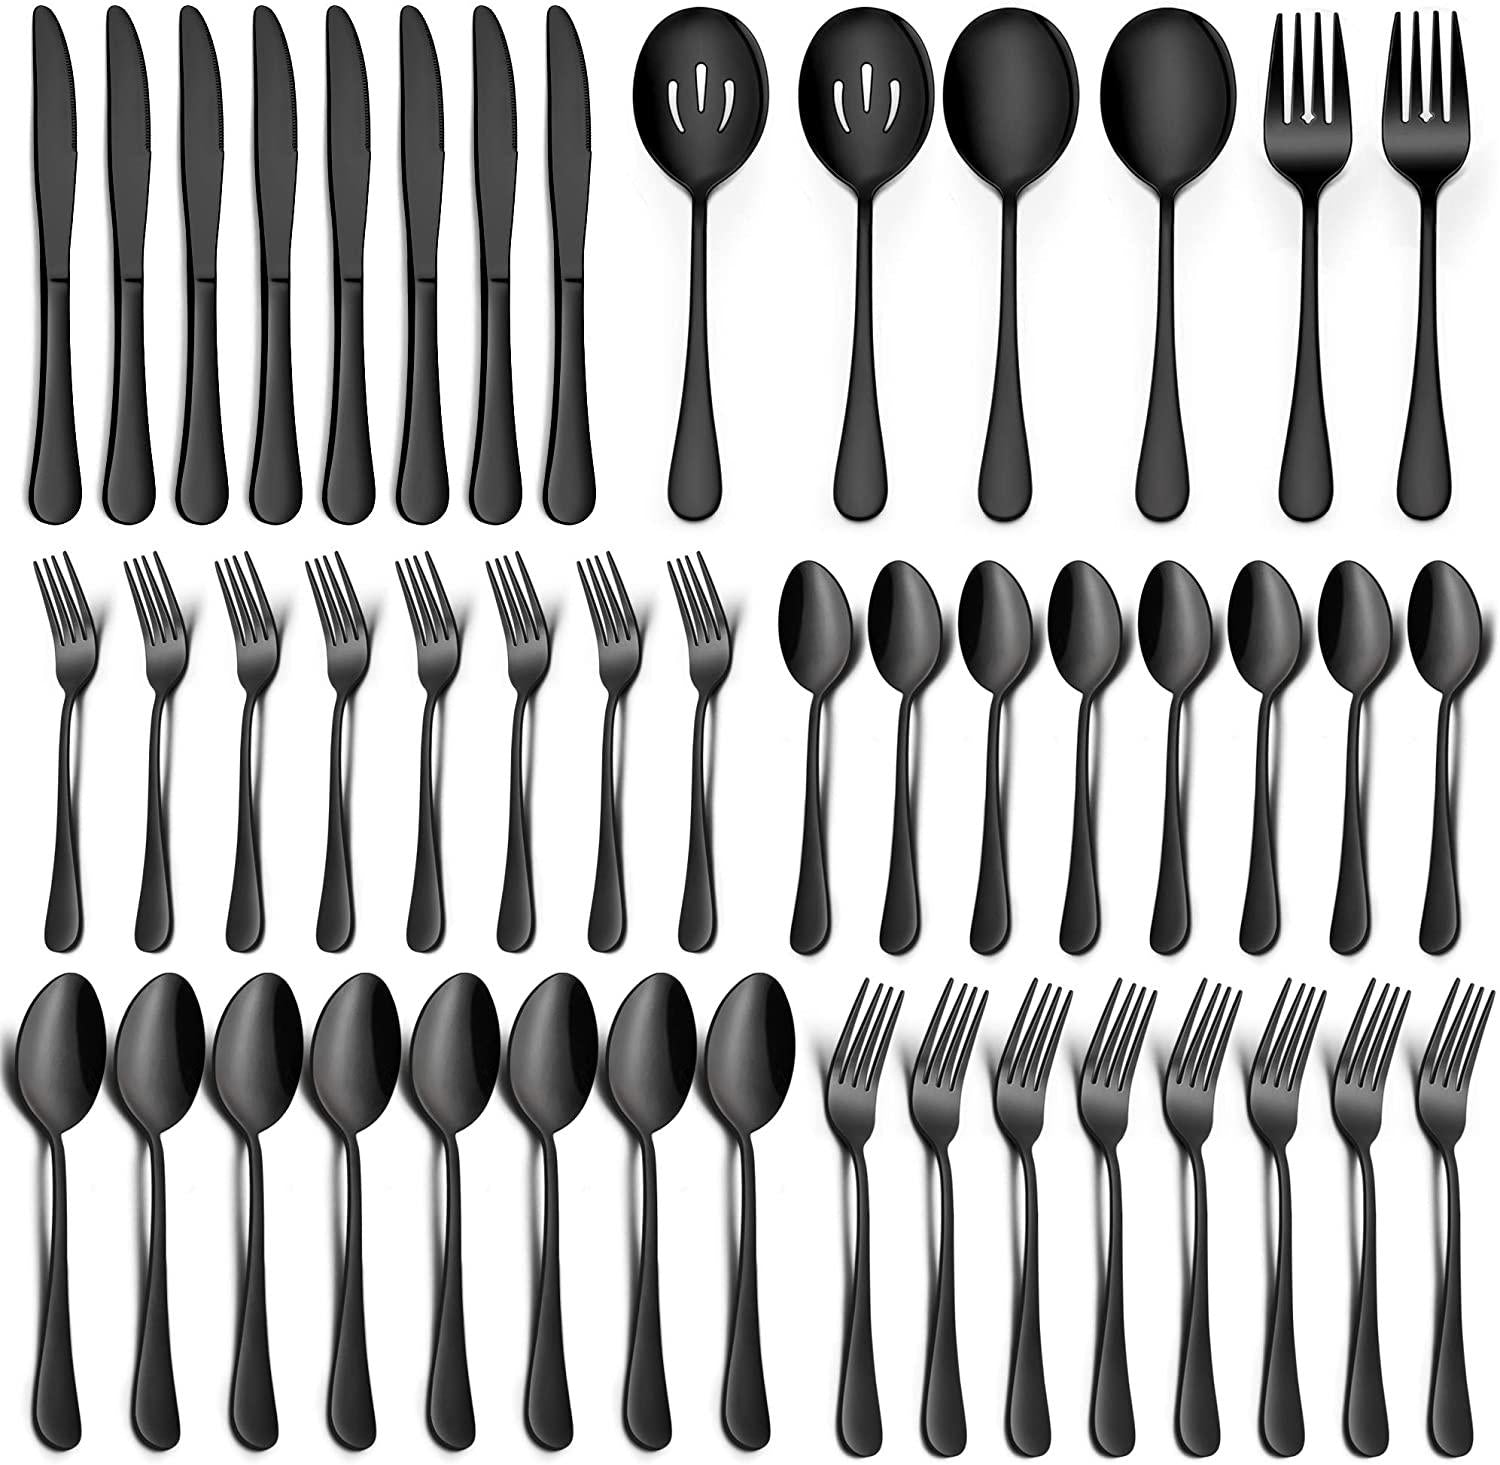 LIANYU, LIANYU 46-Piece Black Silverware Flatware Set for 8, Stainless Steel Flatware with Serving Utensils, Elegant Cutlery Tableware Includes Forks Spoons Knives, Mirror Polished